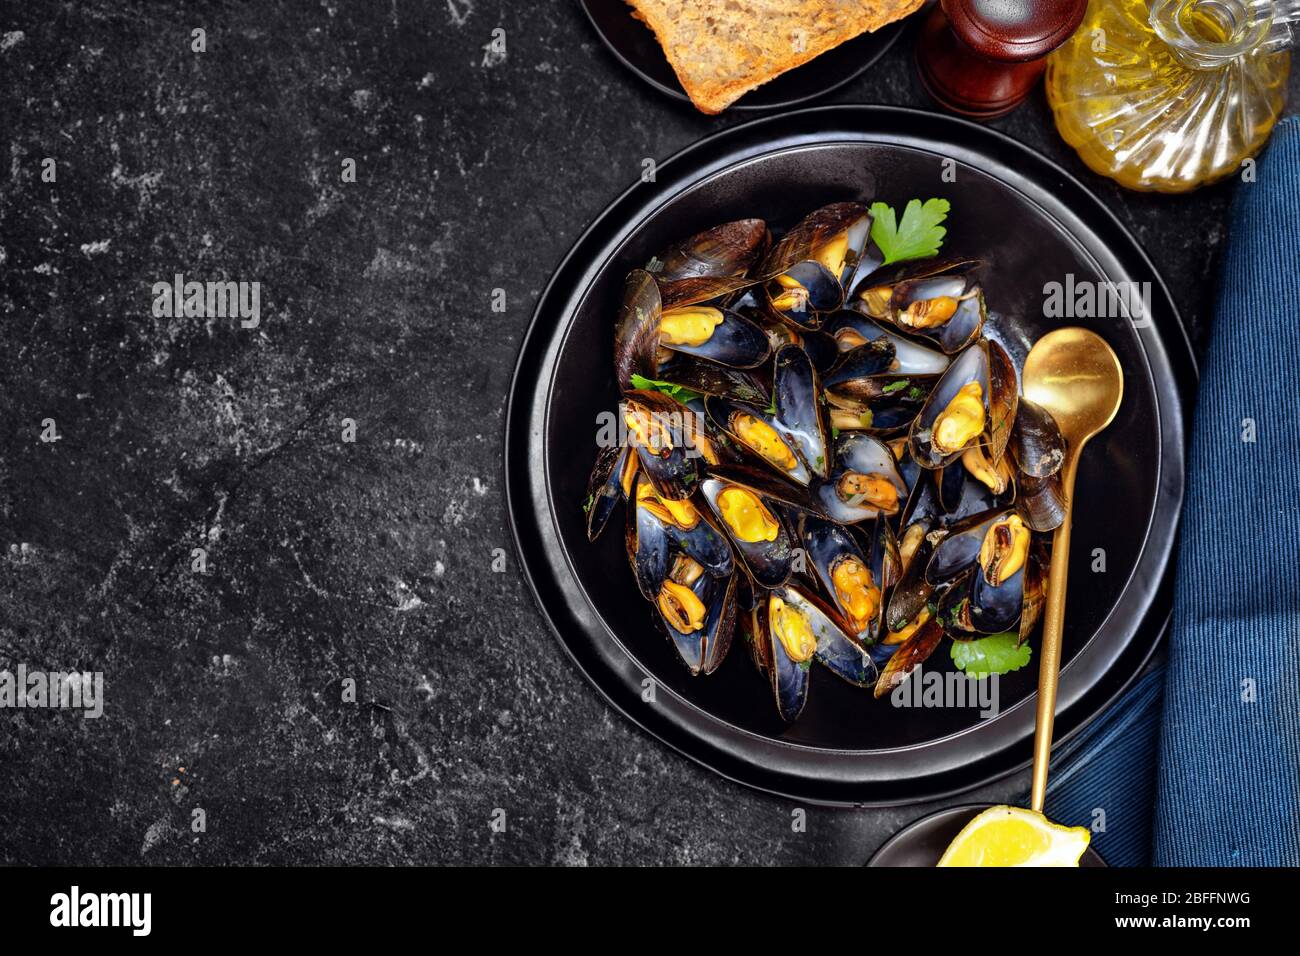 Top view of cooked mussels on black background Stock Photo